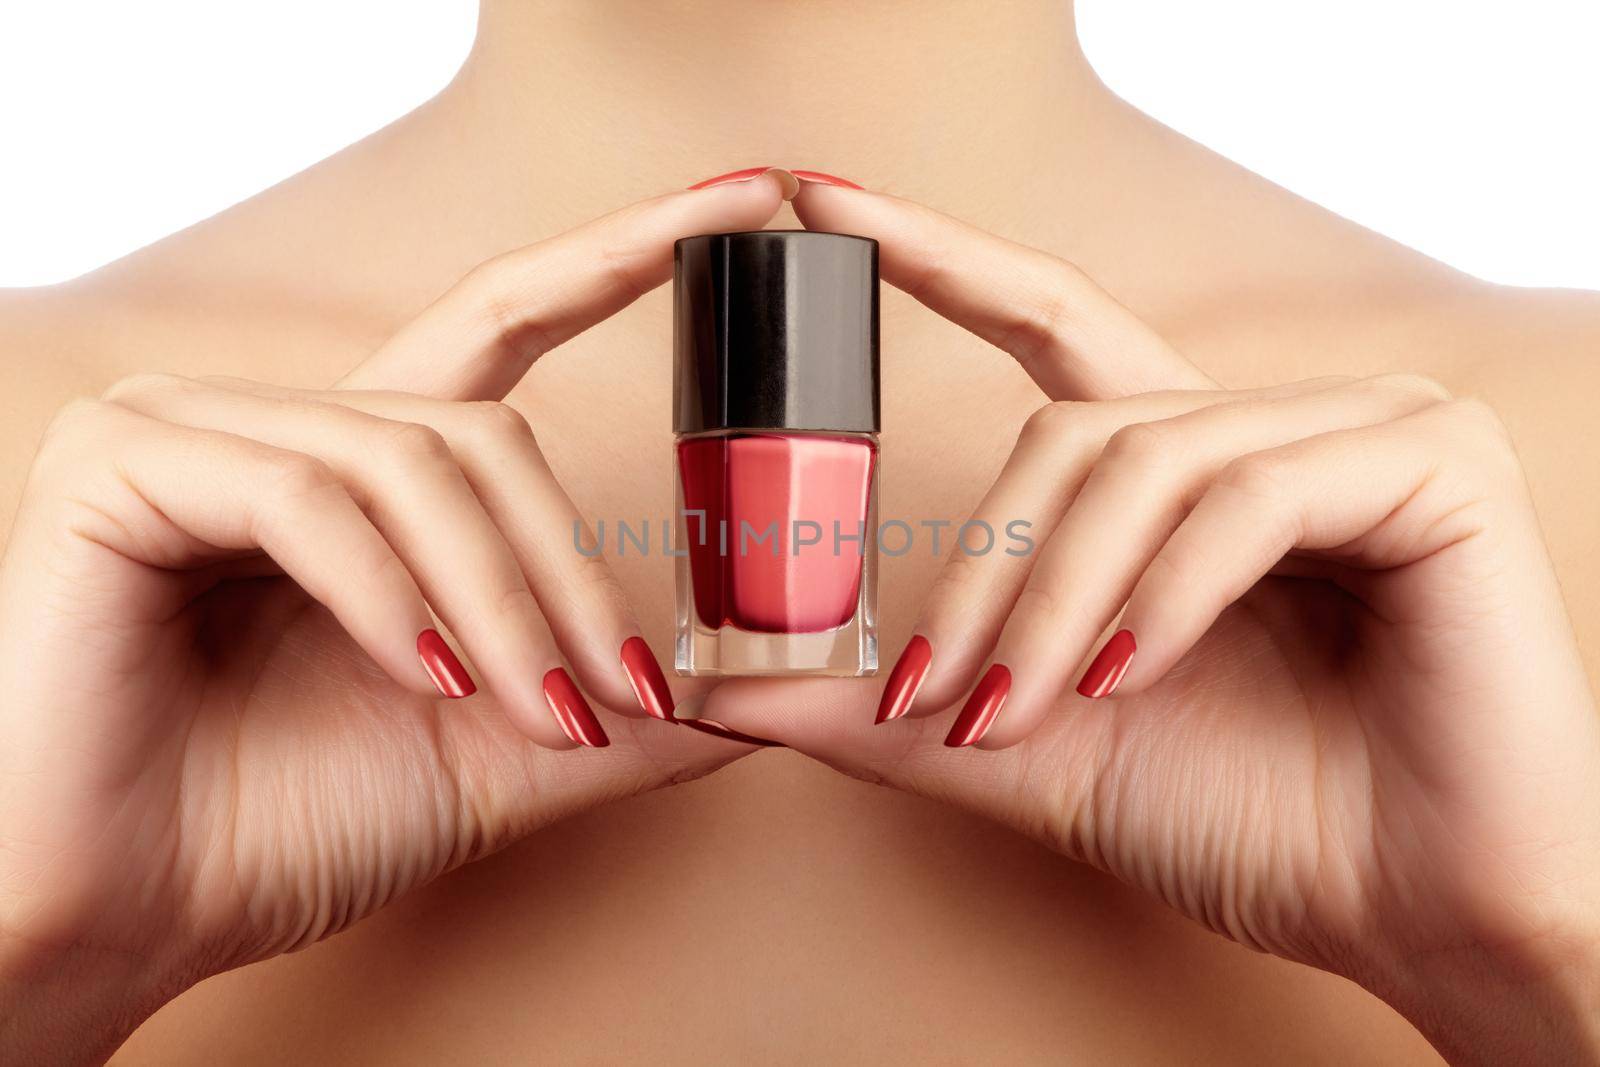 Manicured nails with red nail polish. Manicure with bright nailpolish. Fashion manicure. Shiny gel lacquer in bottle.